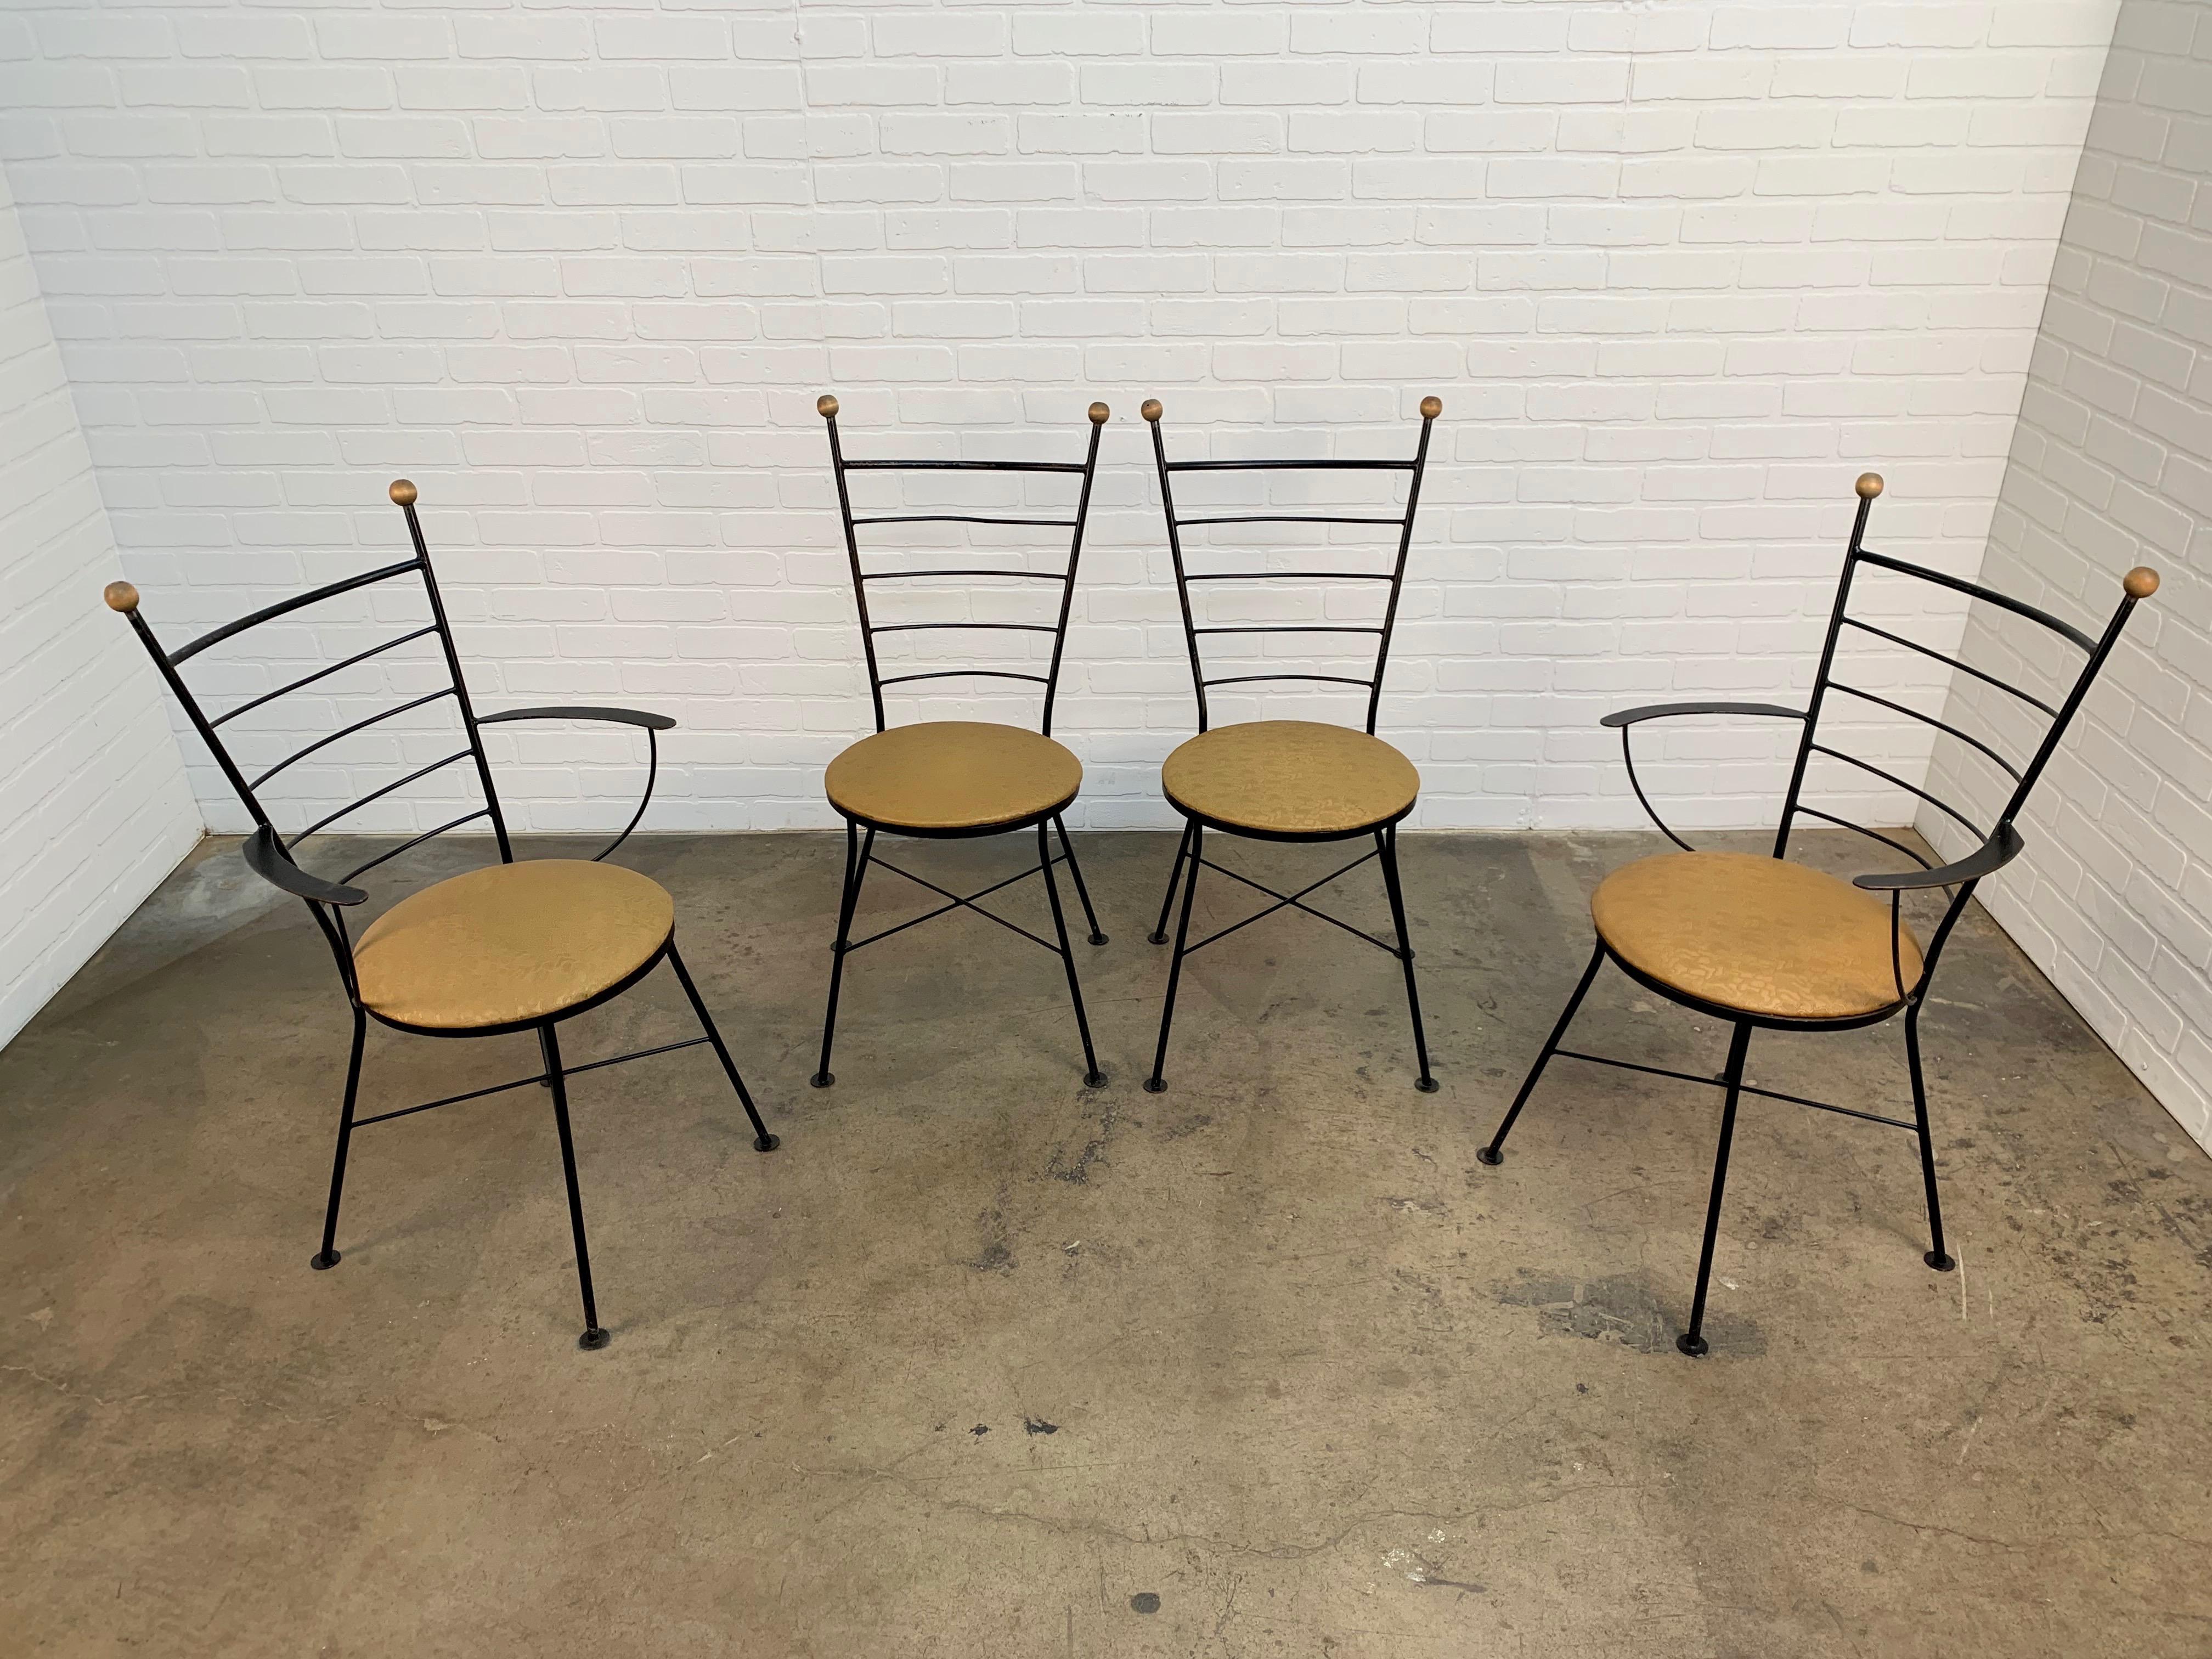 Set of four iron X-base stretcher with wood finials and saucer feet patio chairs
There are two armchairs and two side chairs. The vinyl seats are in very good condition. In the style of Paul McCobb.